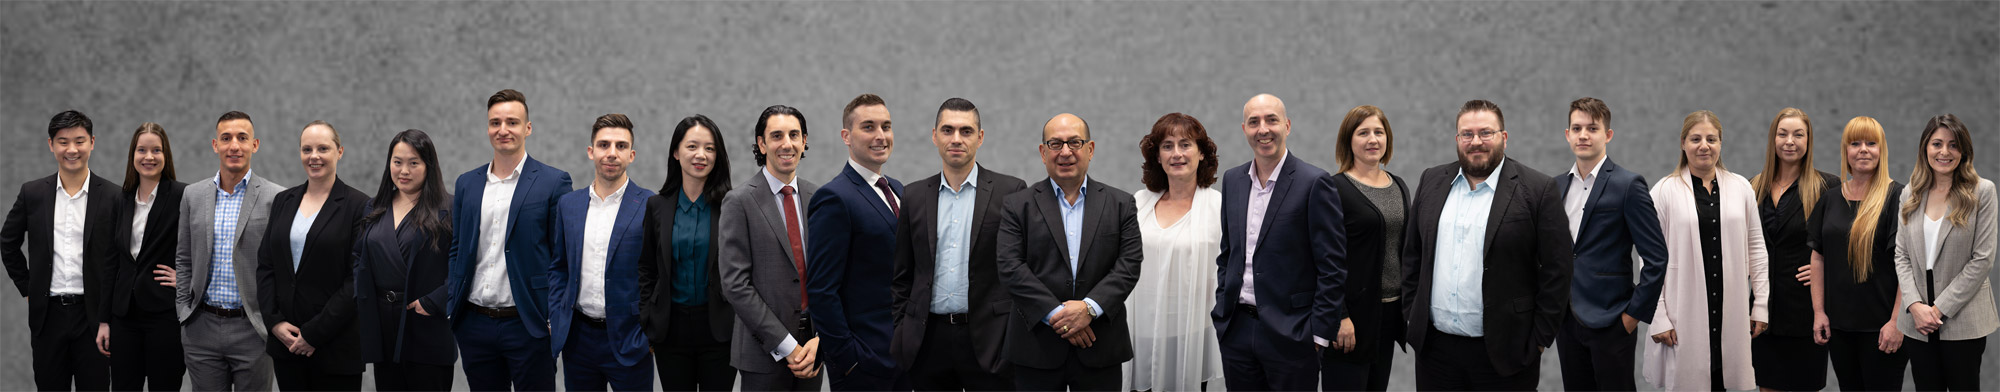 OUR BUSINESS ACCOUNTING TEAM